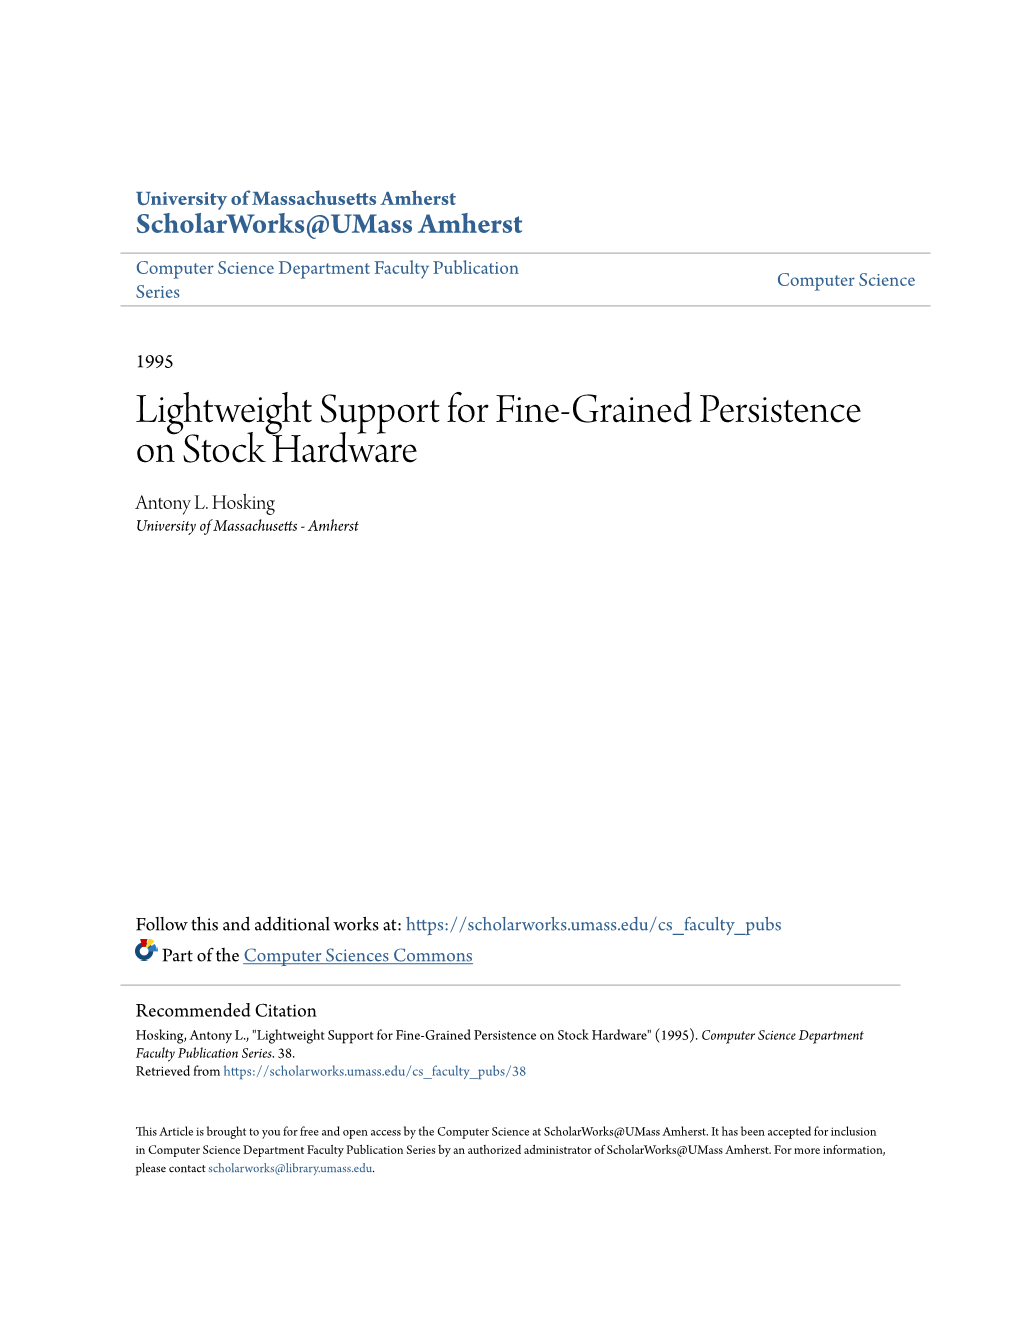 Lightweight Support for Fine-Grained Persistence on Stock Hardware Antony L